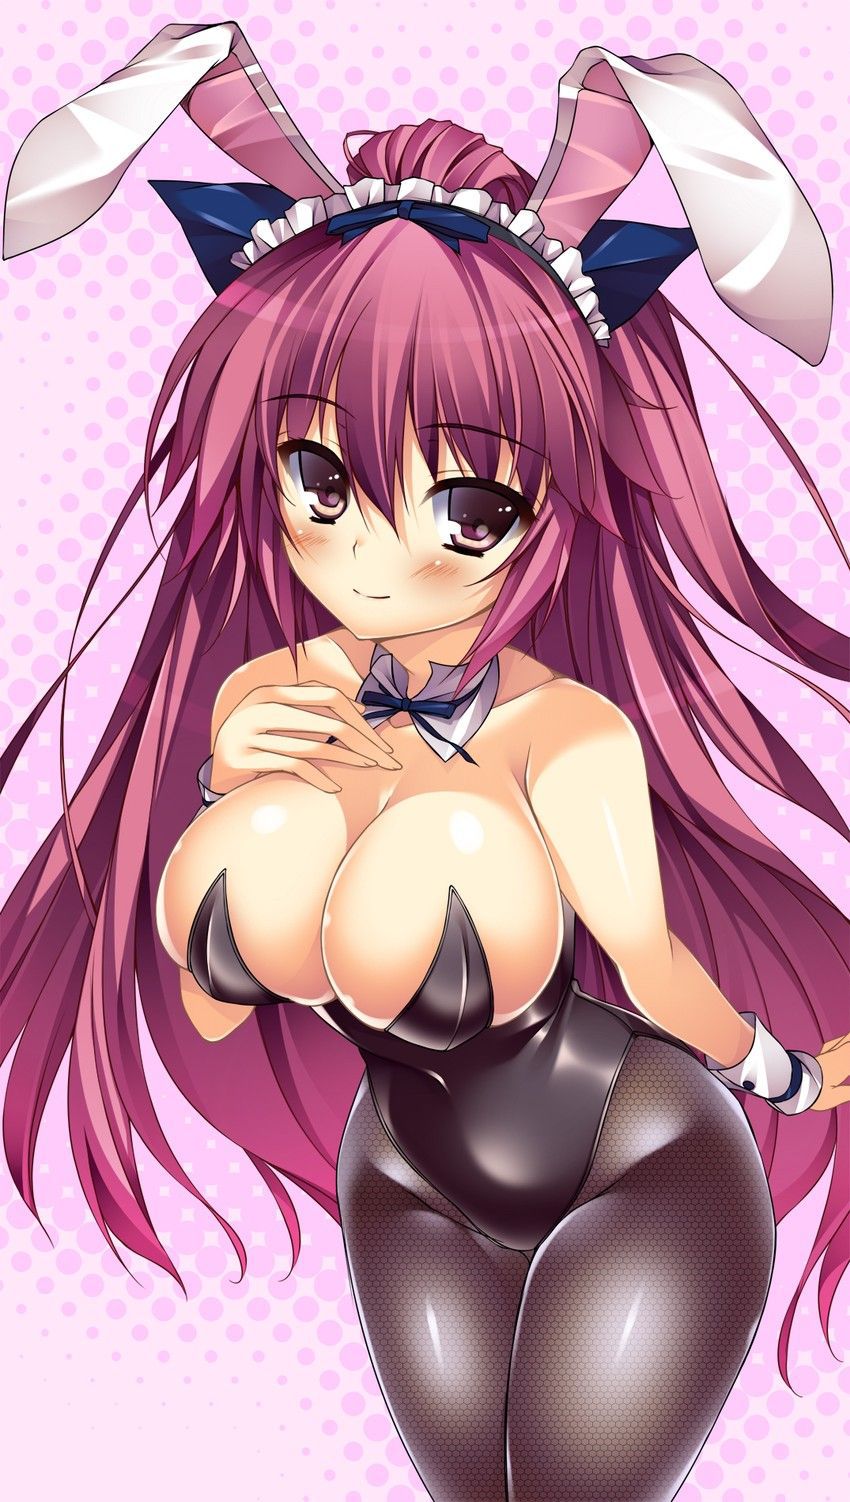 Elo Elo I want entertainment and Bunny girl daughter secondary image (; ° ∀ °) = 3 Mulher 28